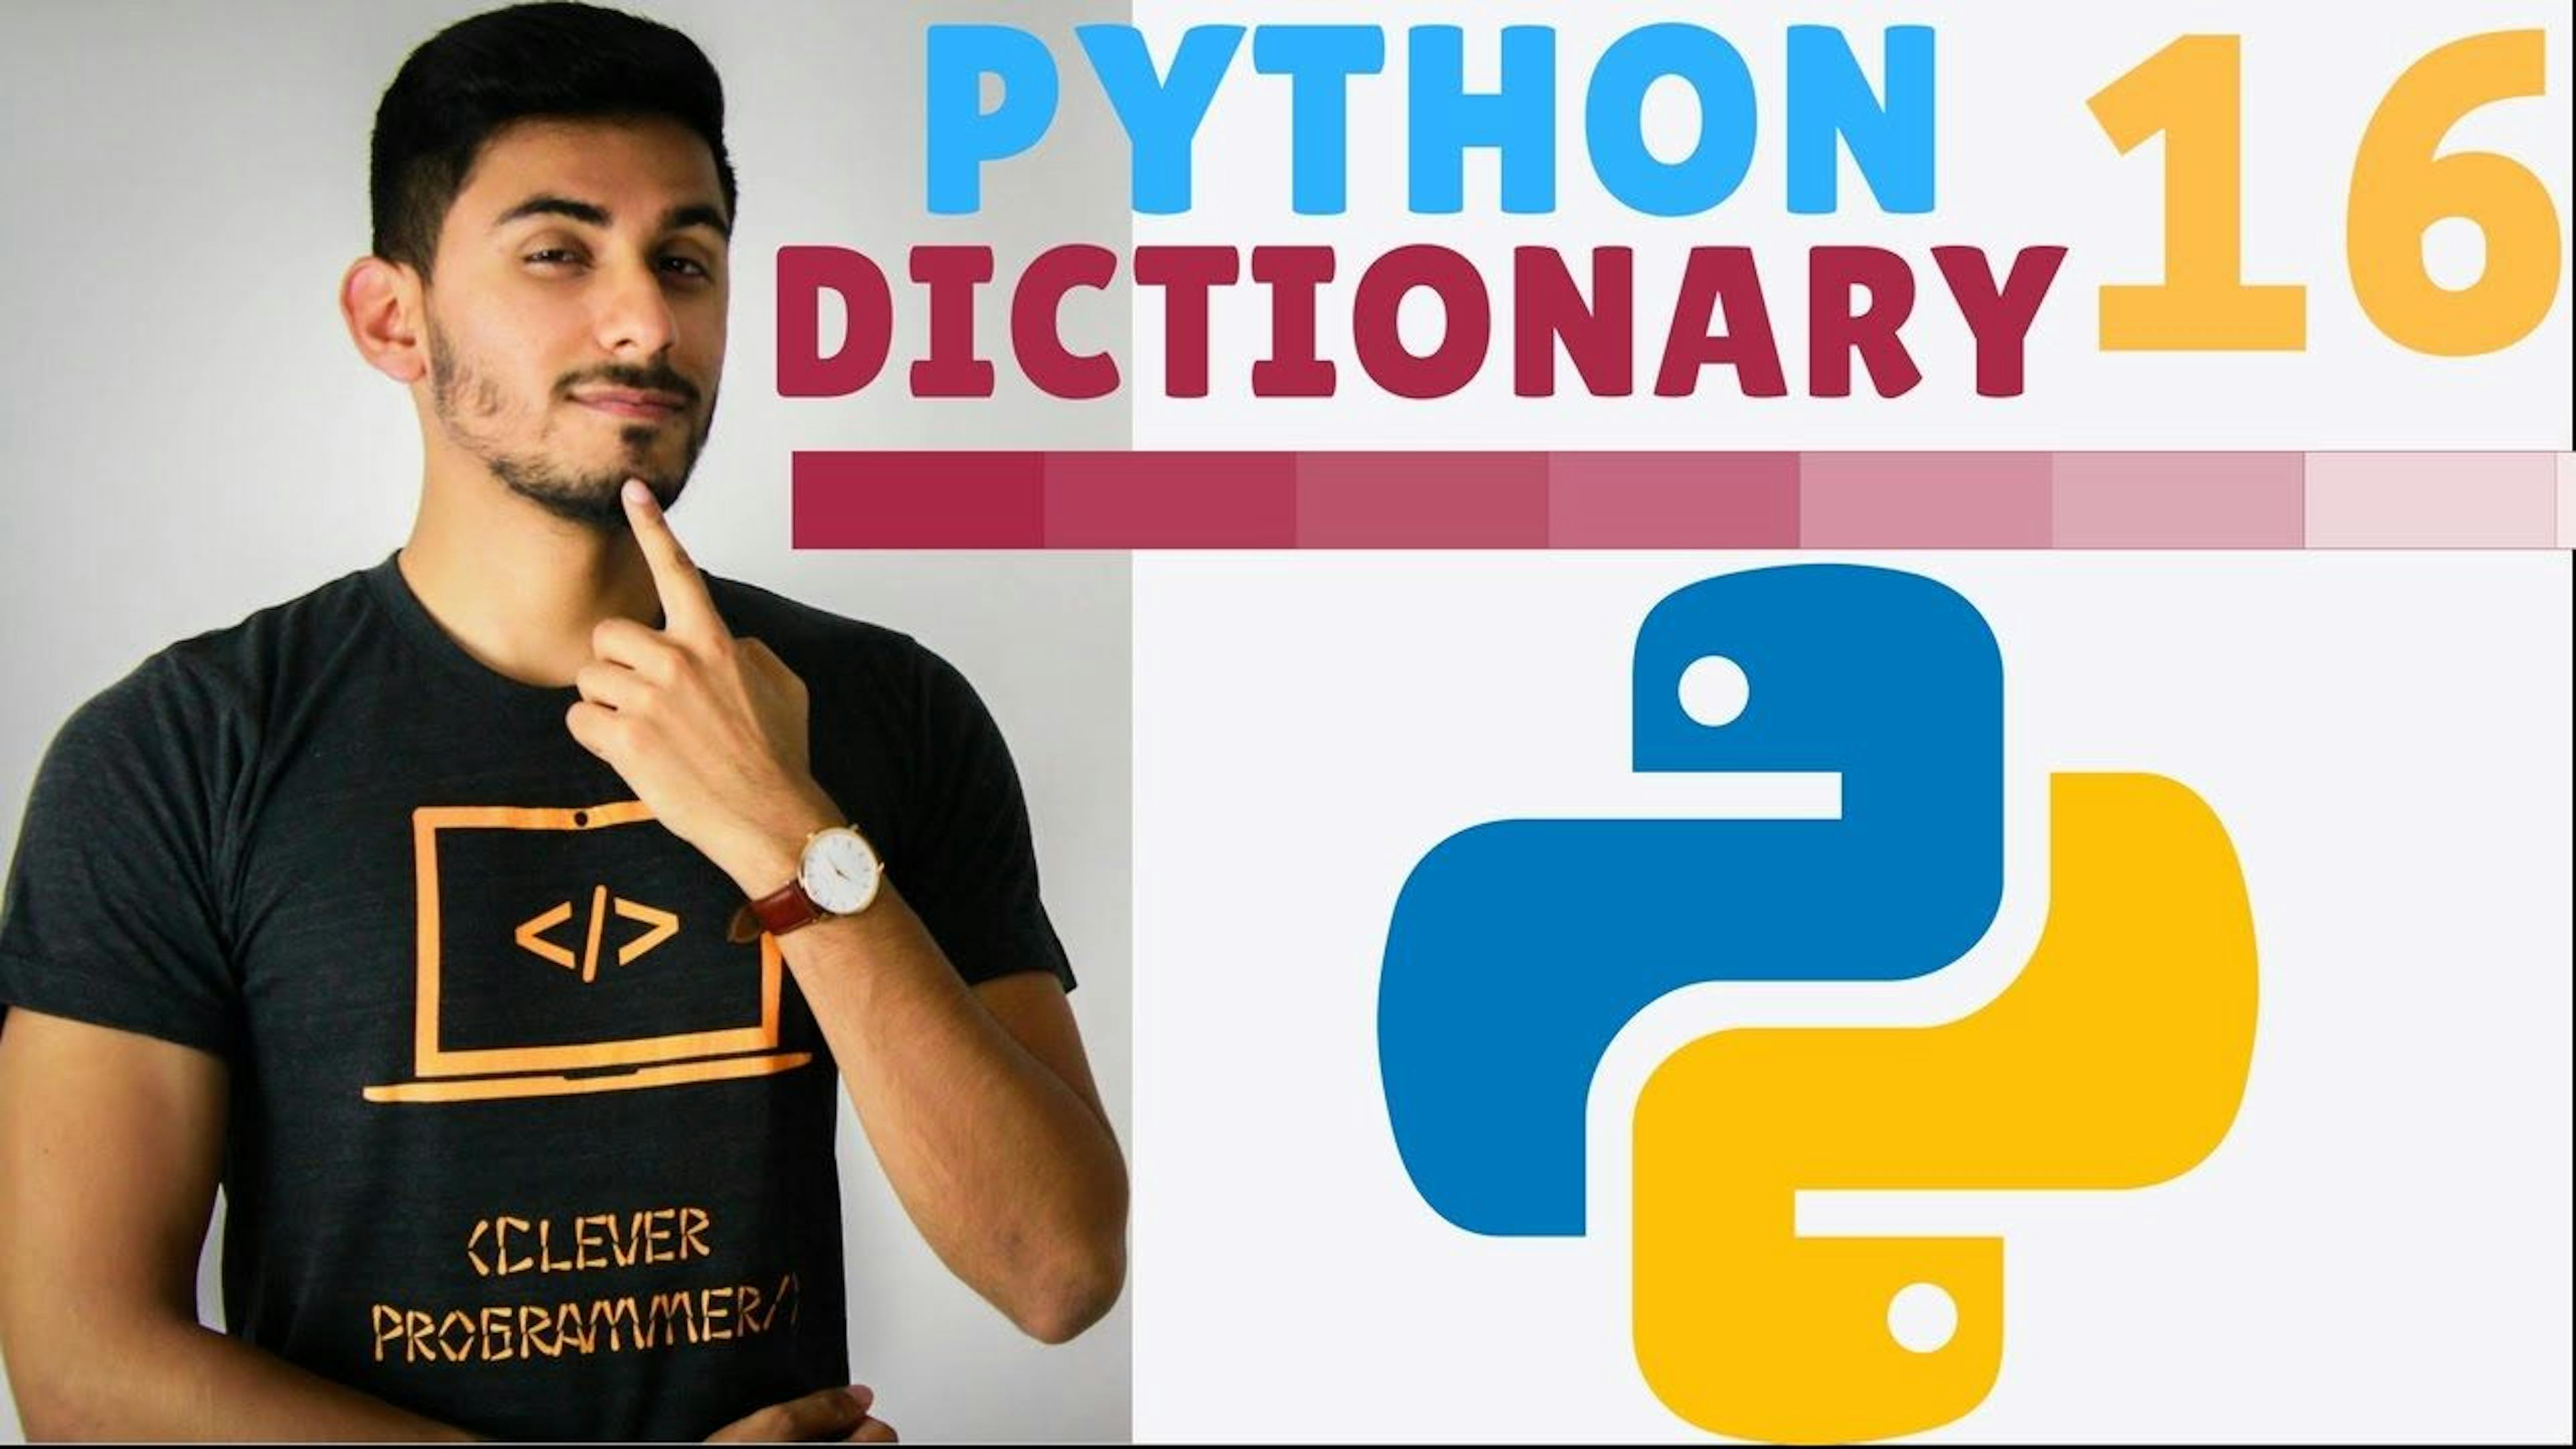 featured image - Python for Beginners, Part 16: Dictionaries